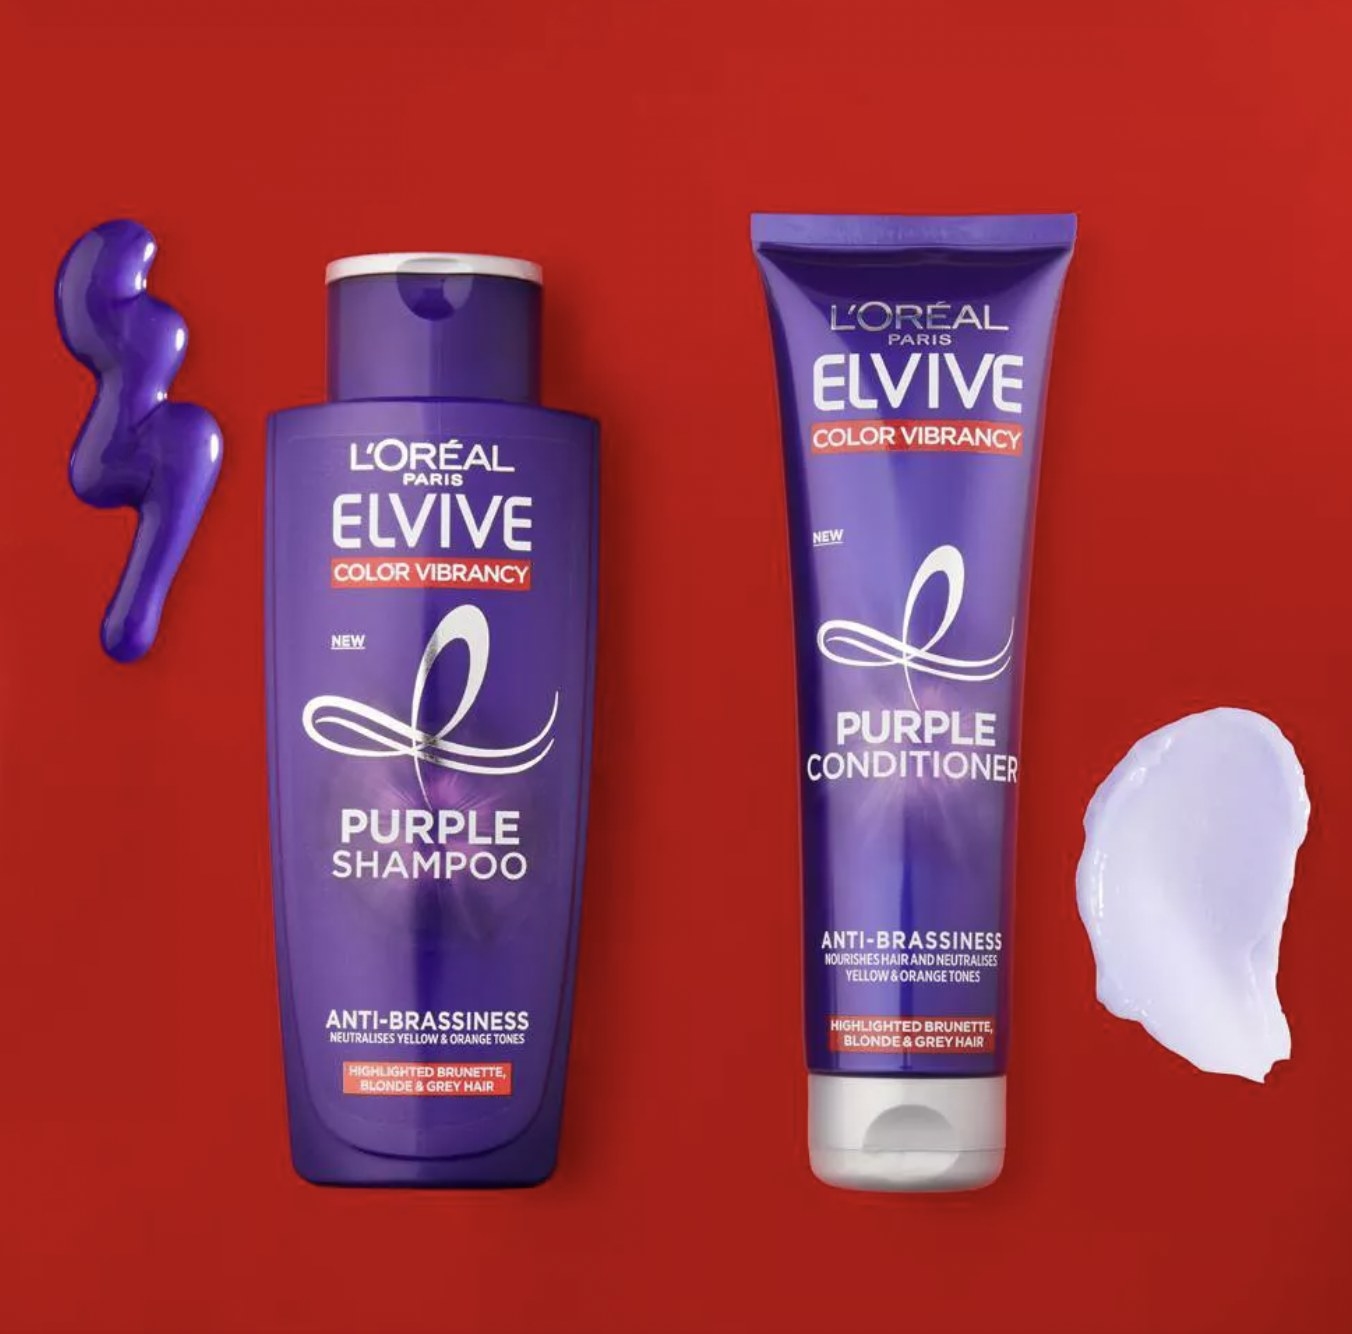 A bottle of purple shampoo and conditioner